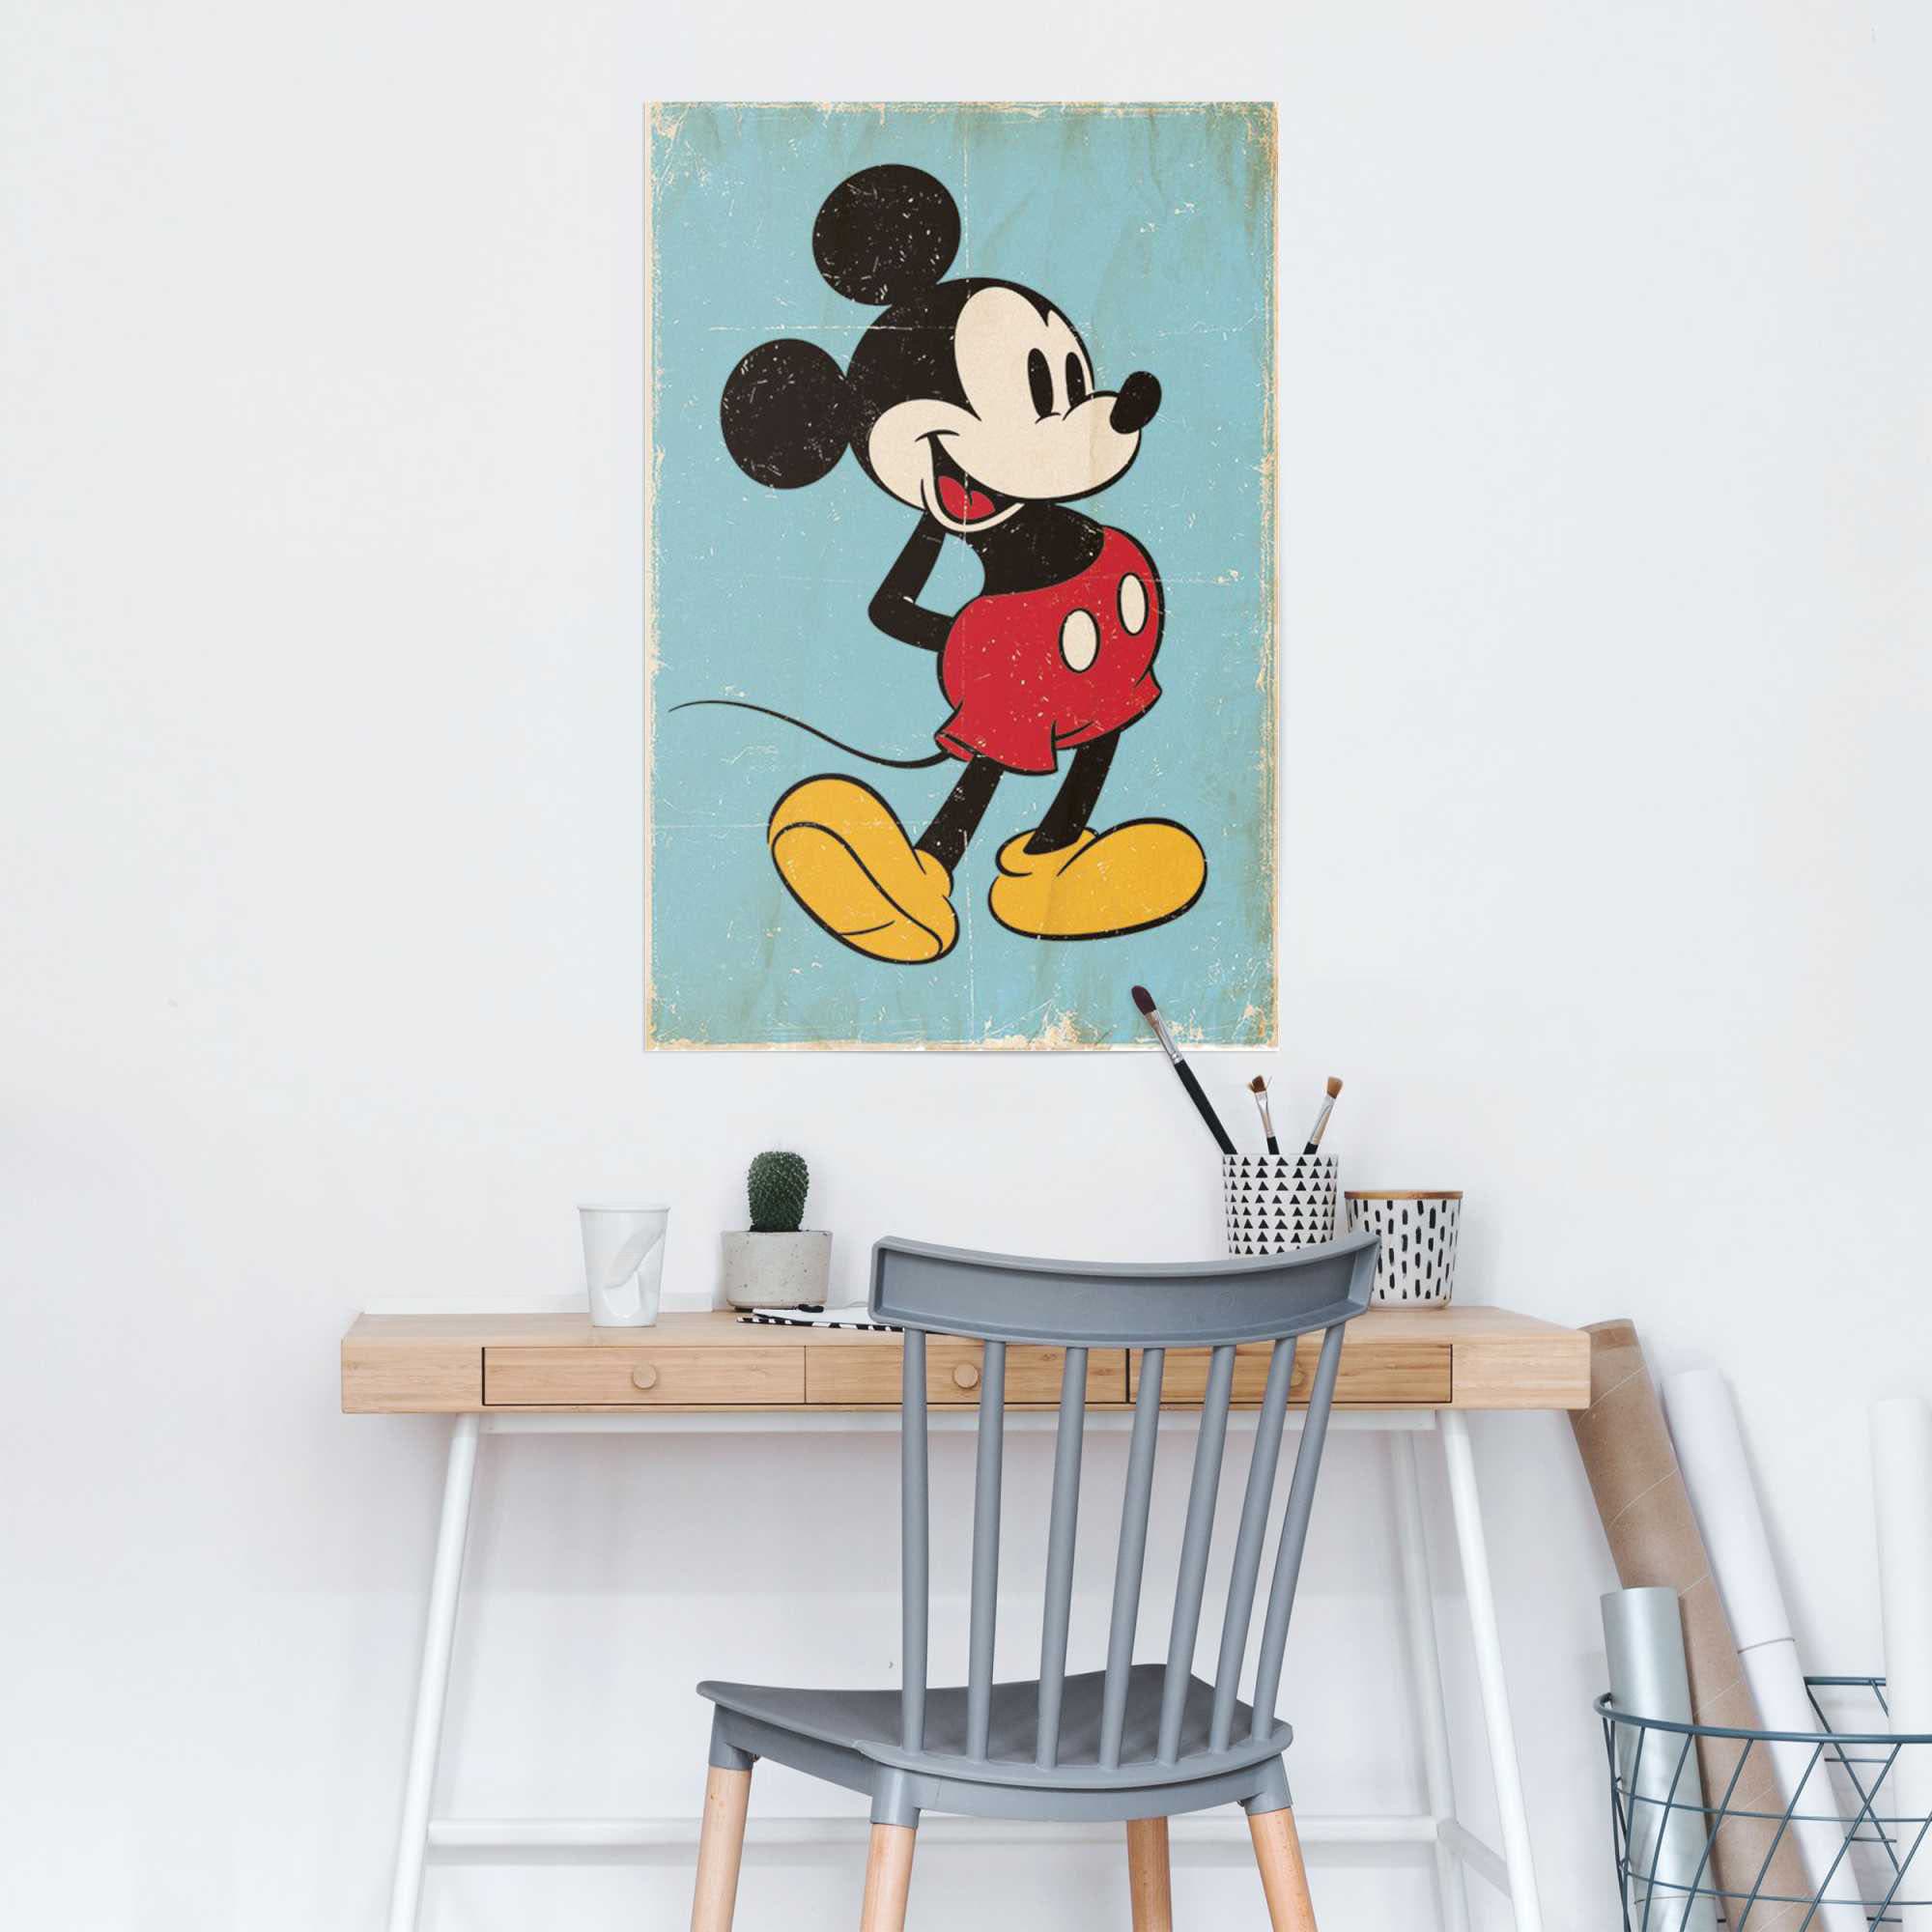 »Mickey St.) retro«, kaufen (1 Poster Mouse Reinders! jetzt